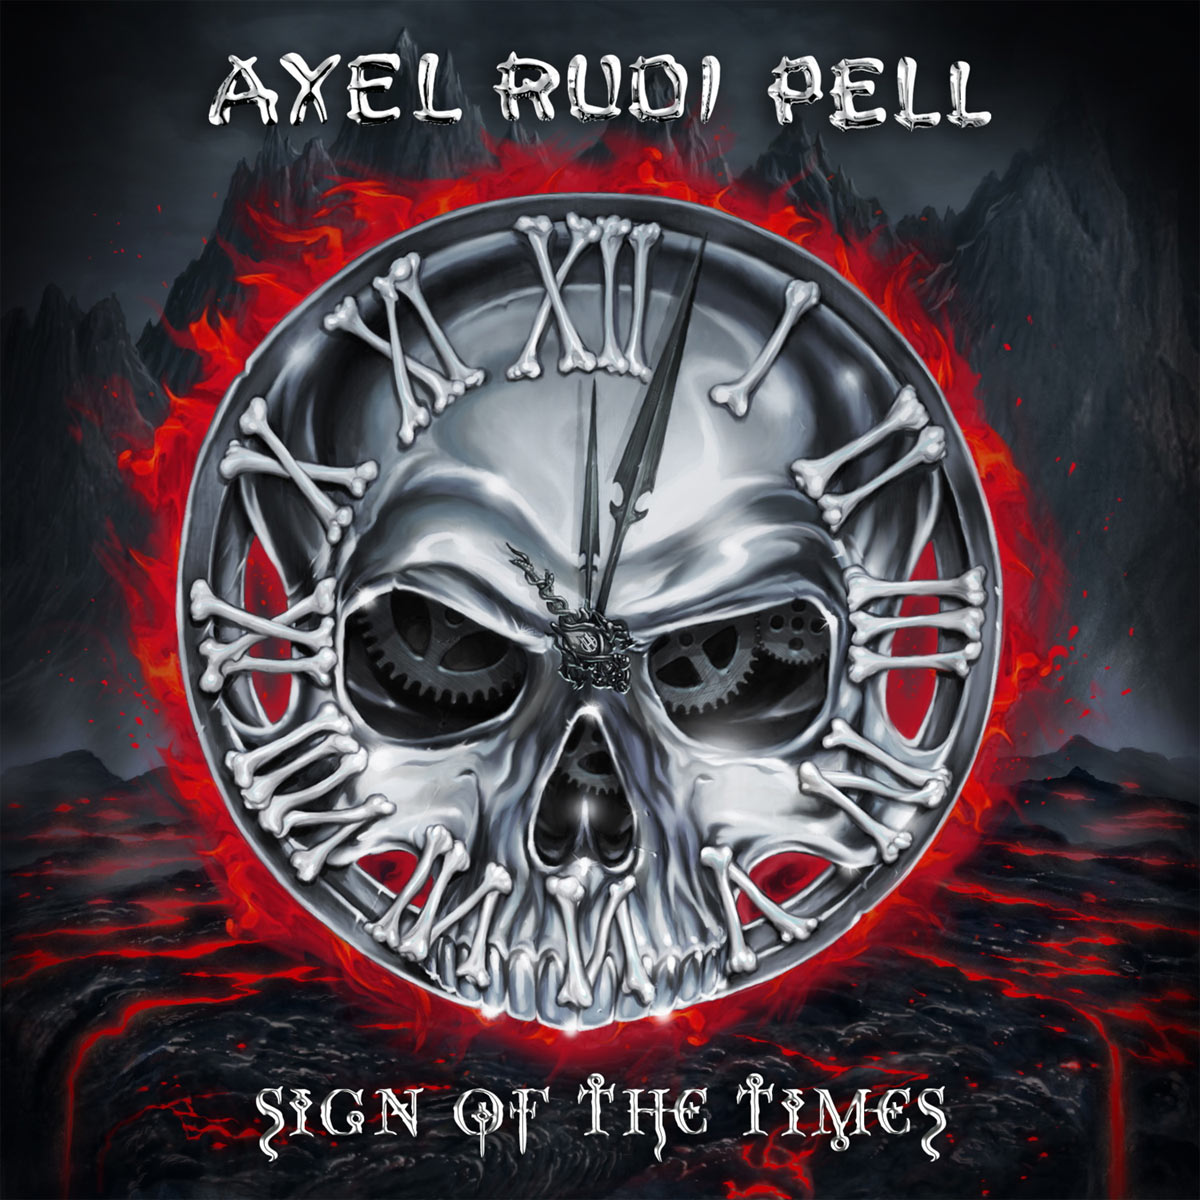 AXEL RUDI PELL Sign of the Times